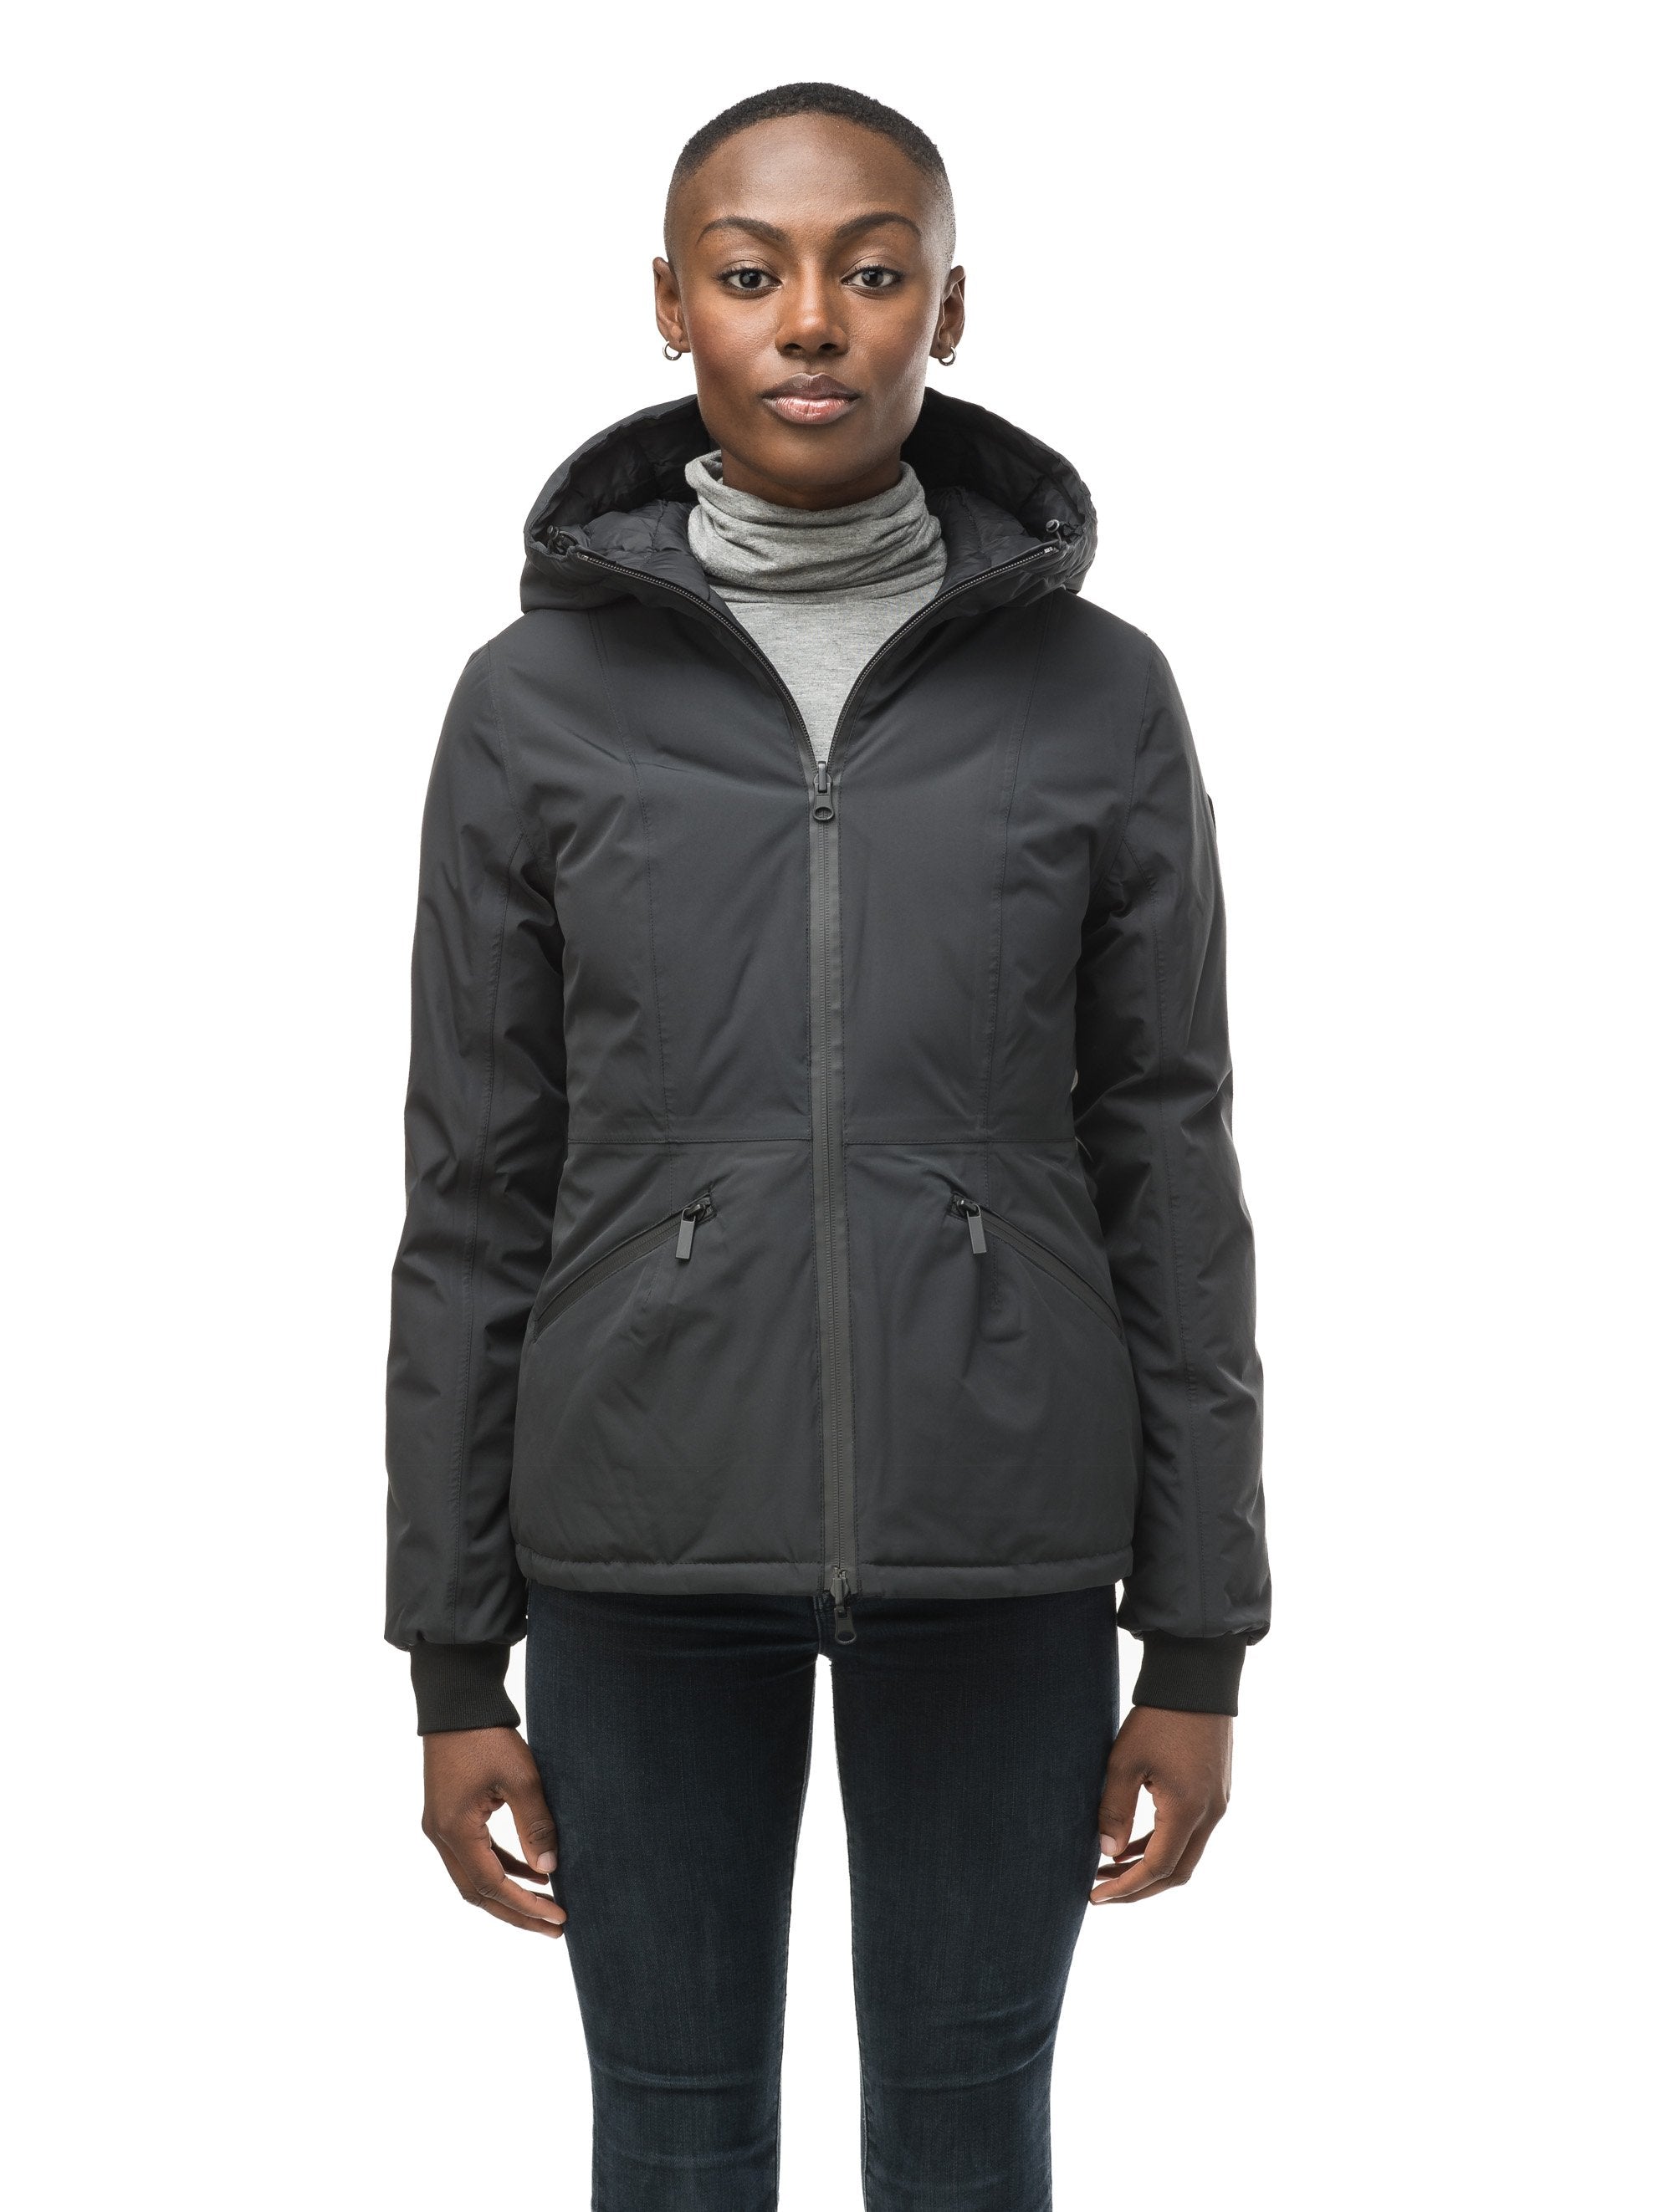 The ONE Women's Jacket by Kuhl